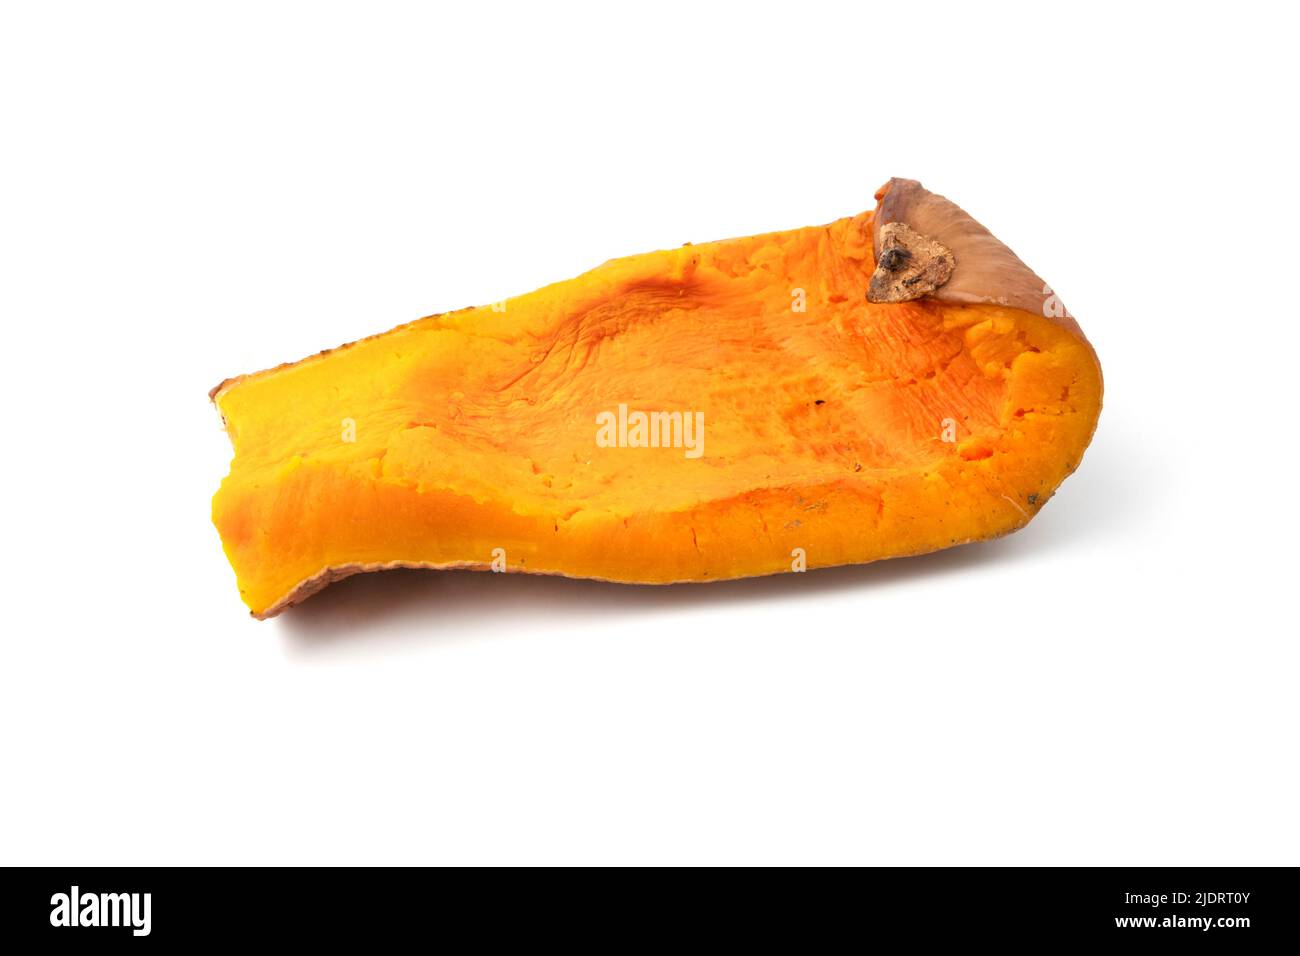 Slice of oven roasted pumpkin on a white background Stock Photo